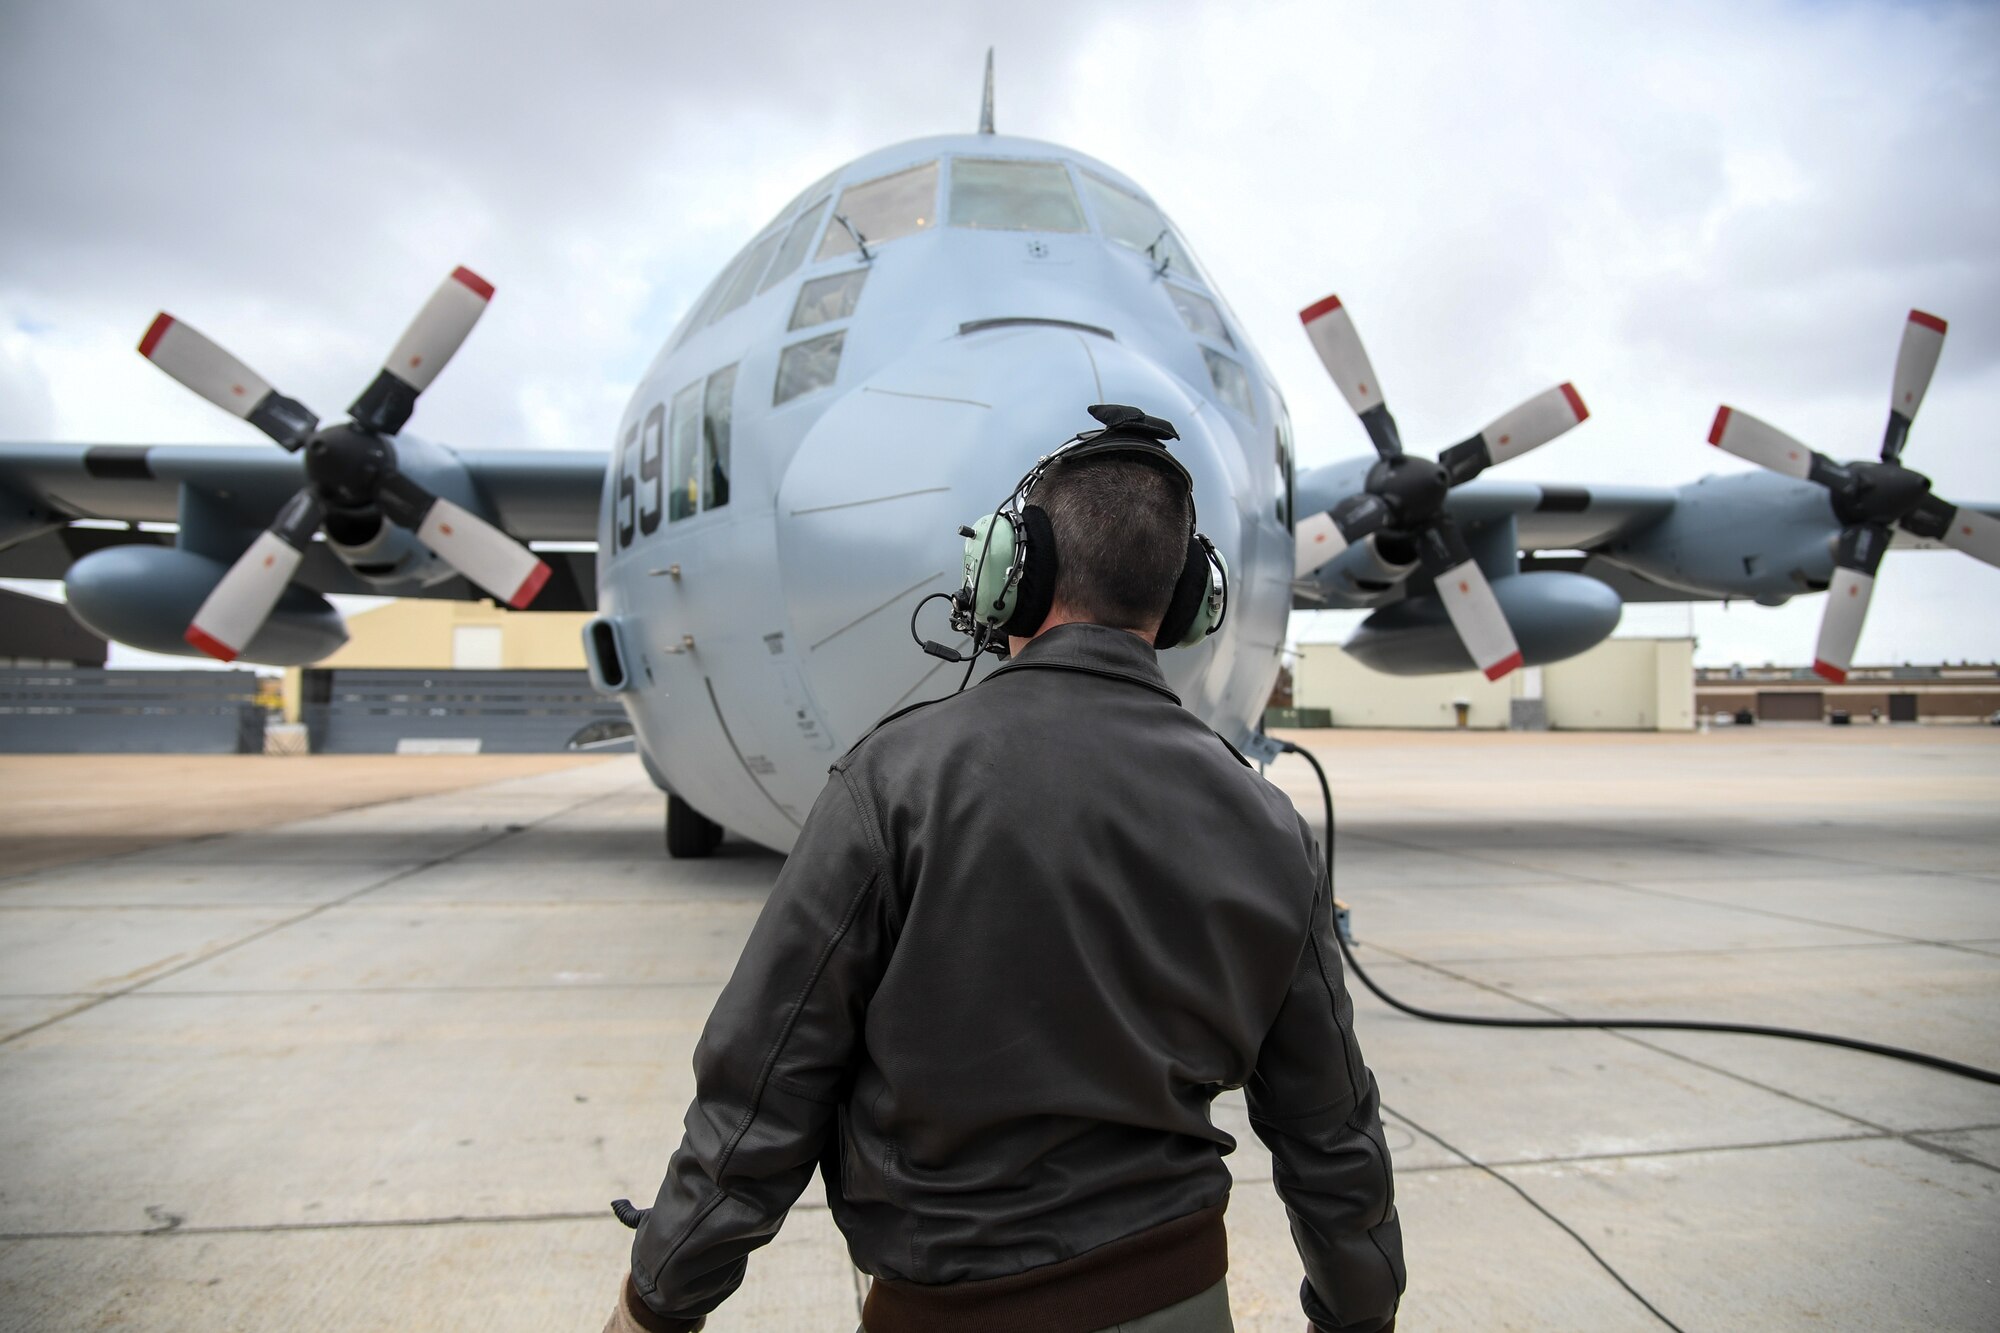 Master Sgt. Allen Clutter, a flight engineer attached to 514th Flight Test Squadron, performs a pre-flight functional flight check on a U.S. Navy C-130 Hercules April 11, 2019, at Hill Air Force Base, Utah. (U.S. Air Force photo by Cynthia Griggs)